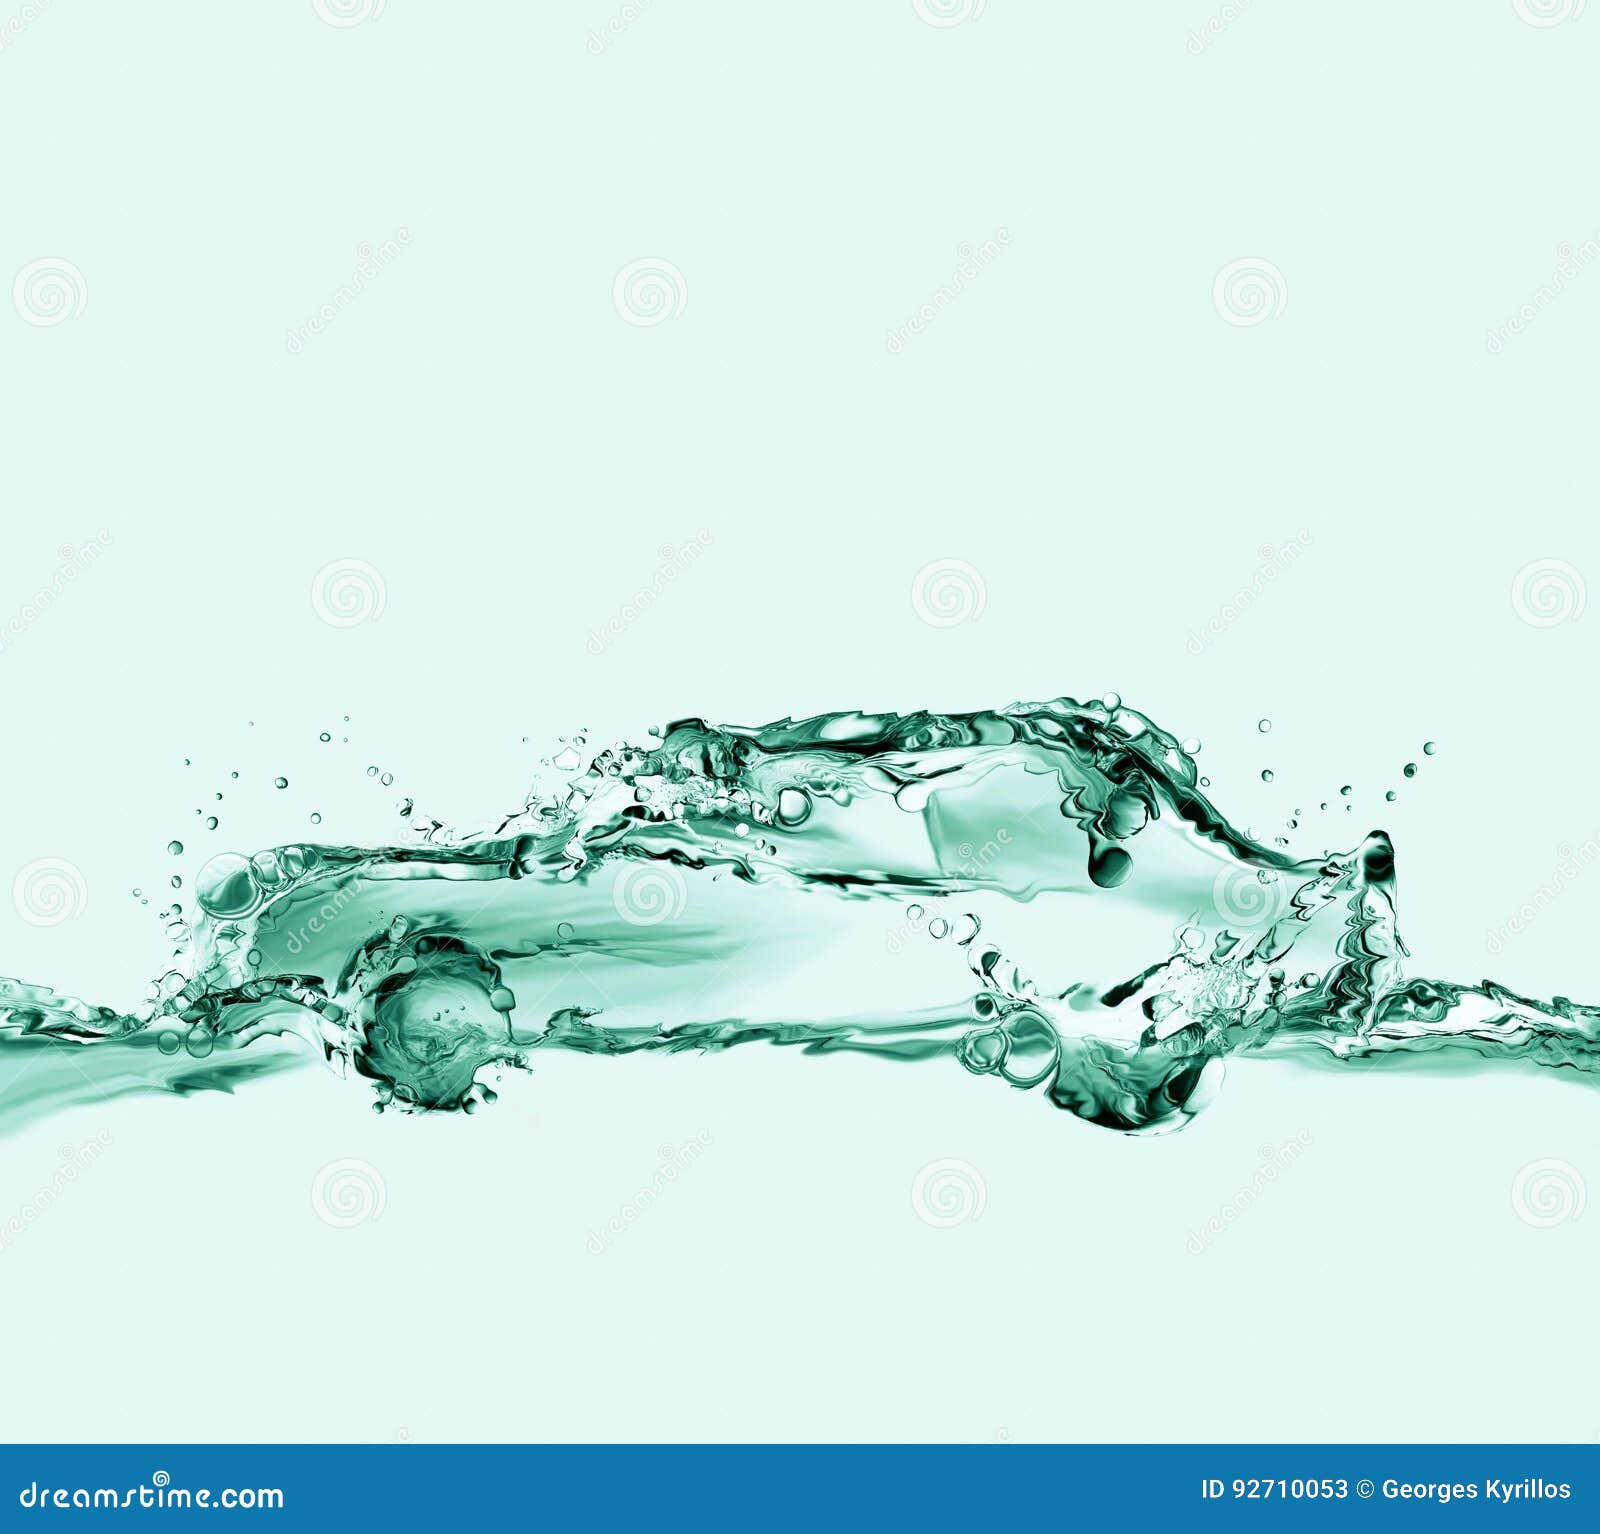 Ecologically-Friendly Water Car Stock Image - Image of bubbles, creative:  92710053